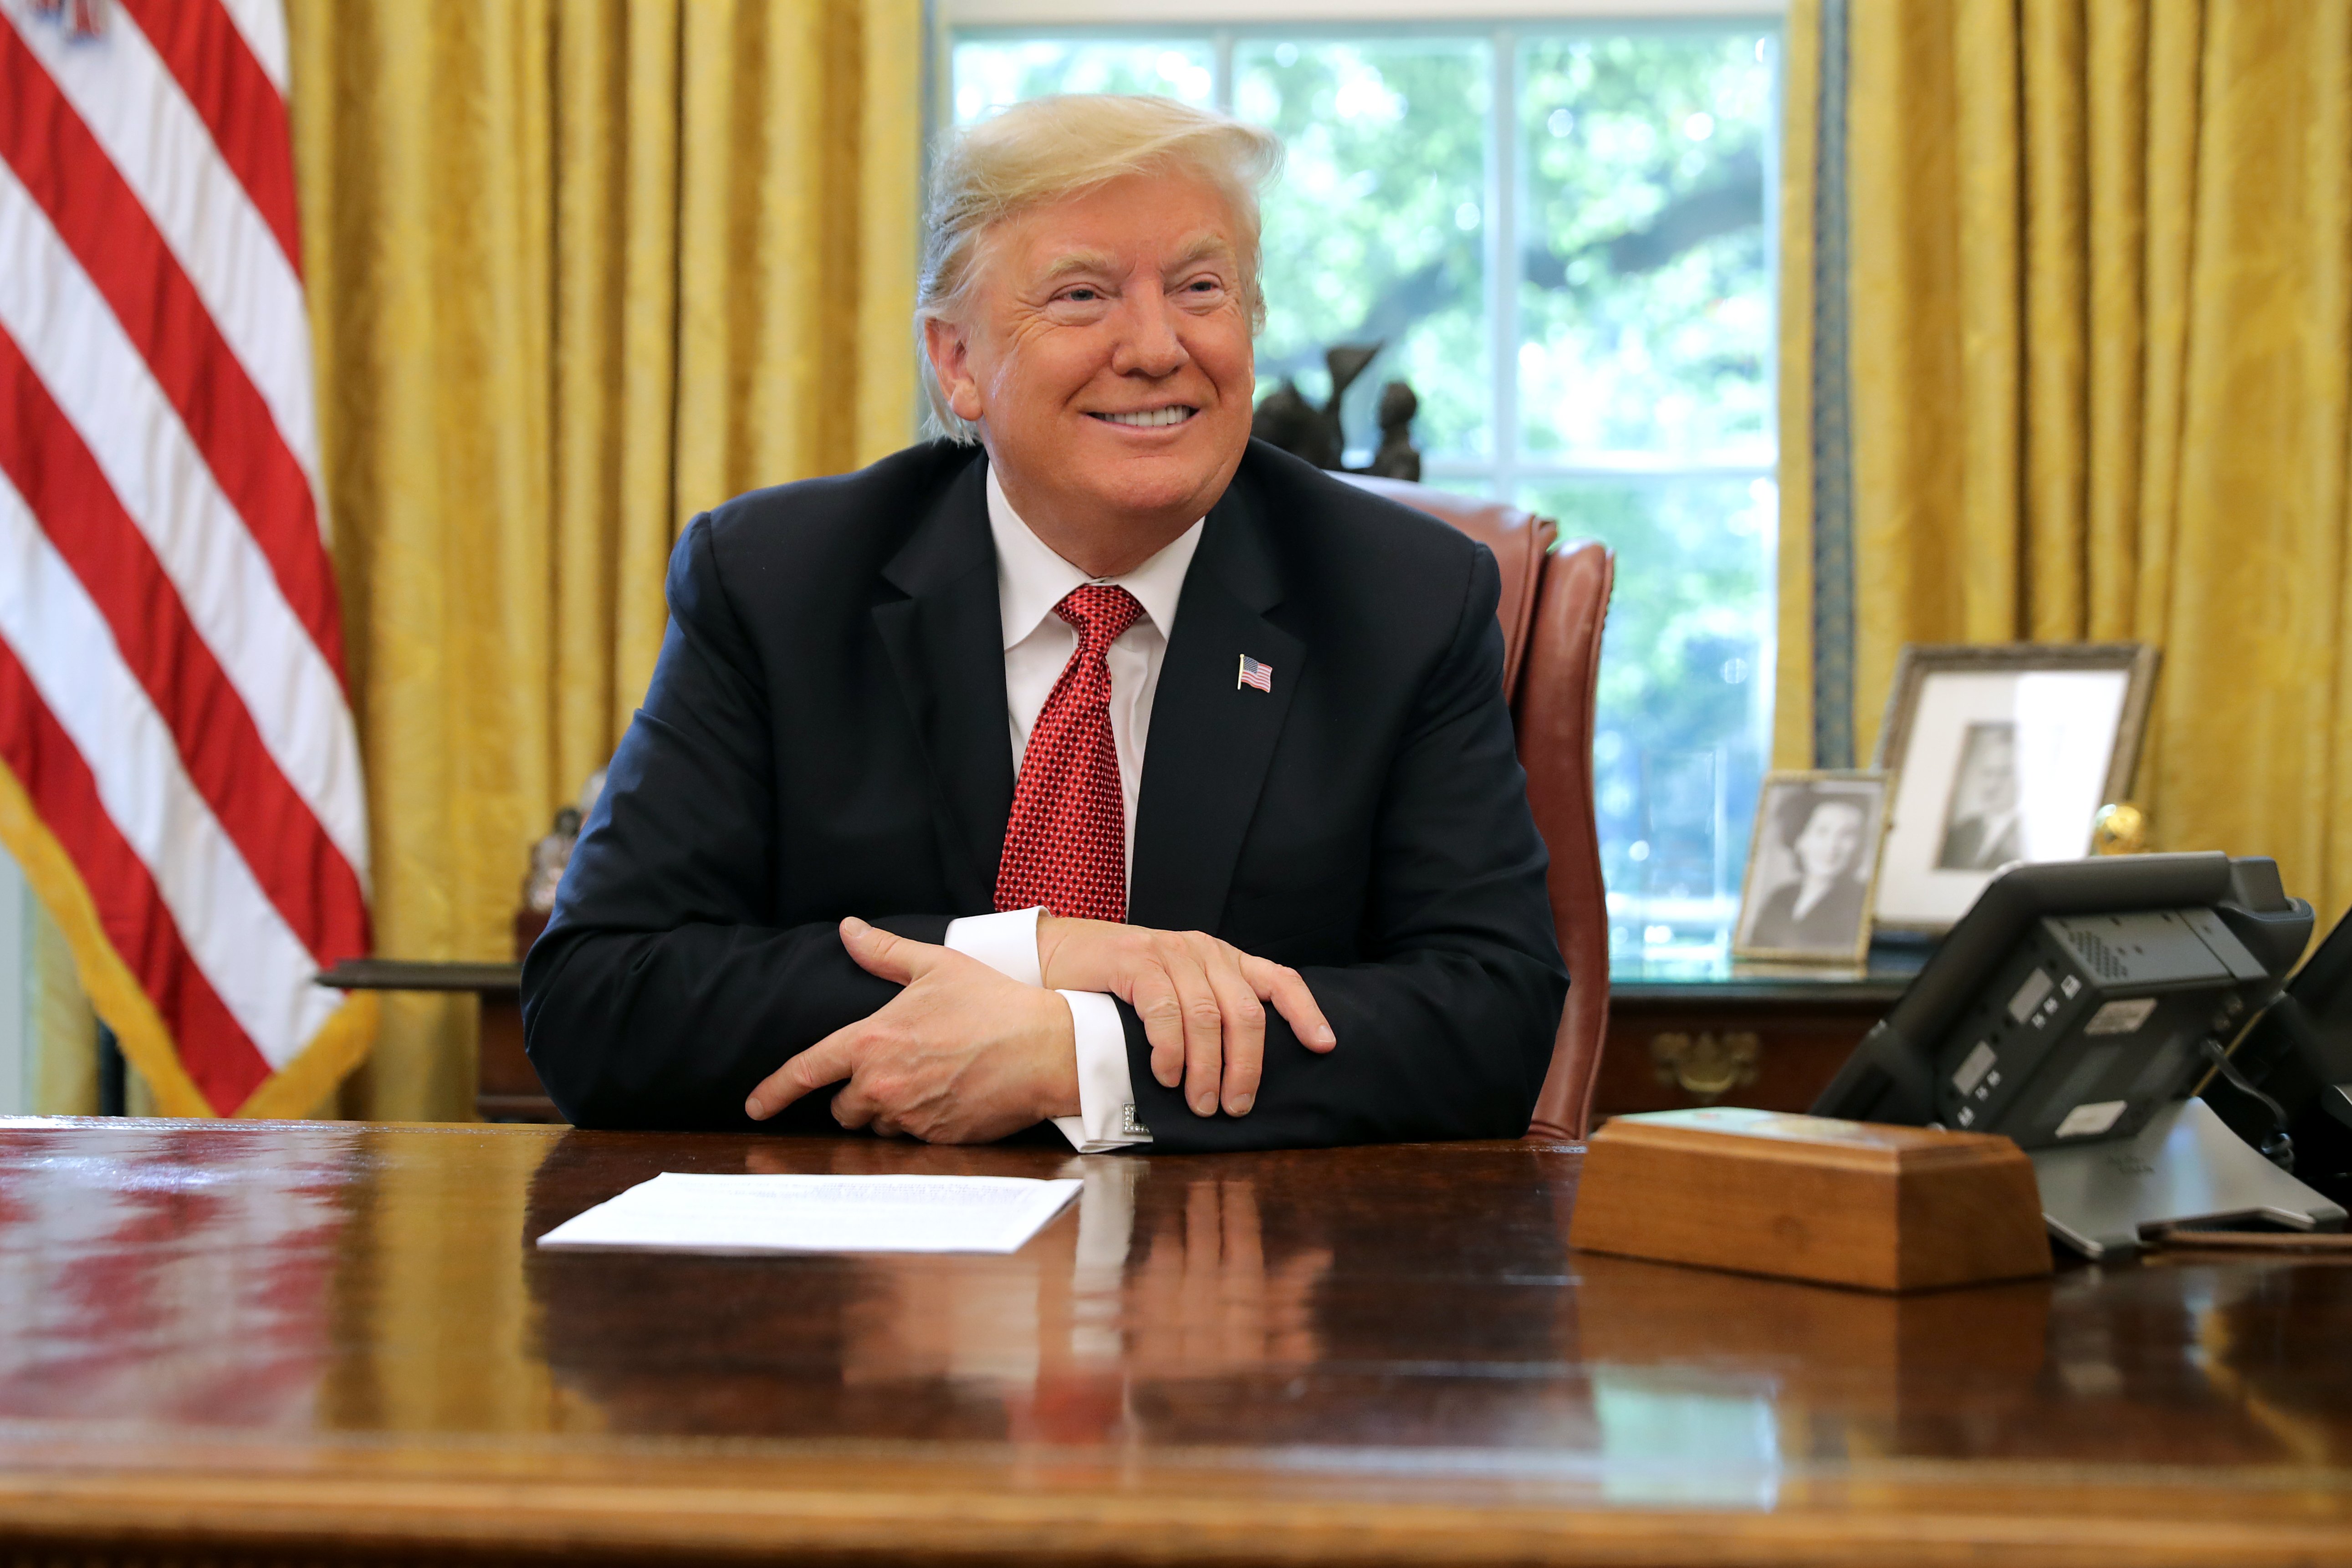  Donald Trump in the Oval Office at the White House October 17, 2018 | Photo: GettyImages